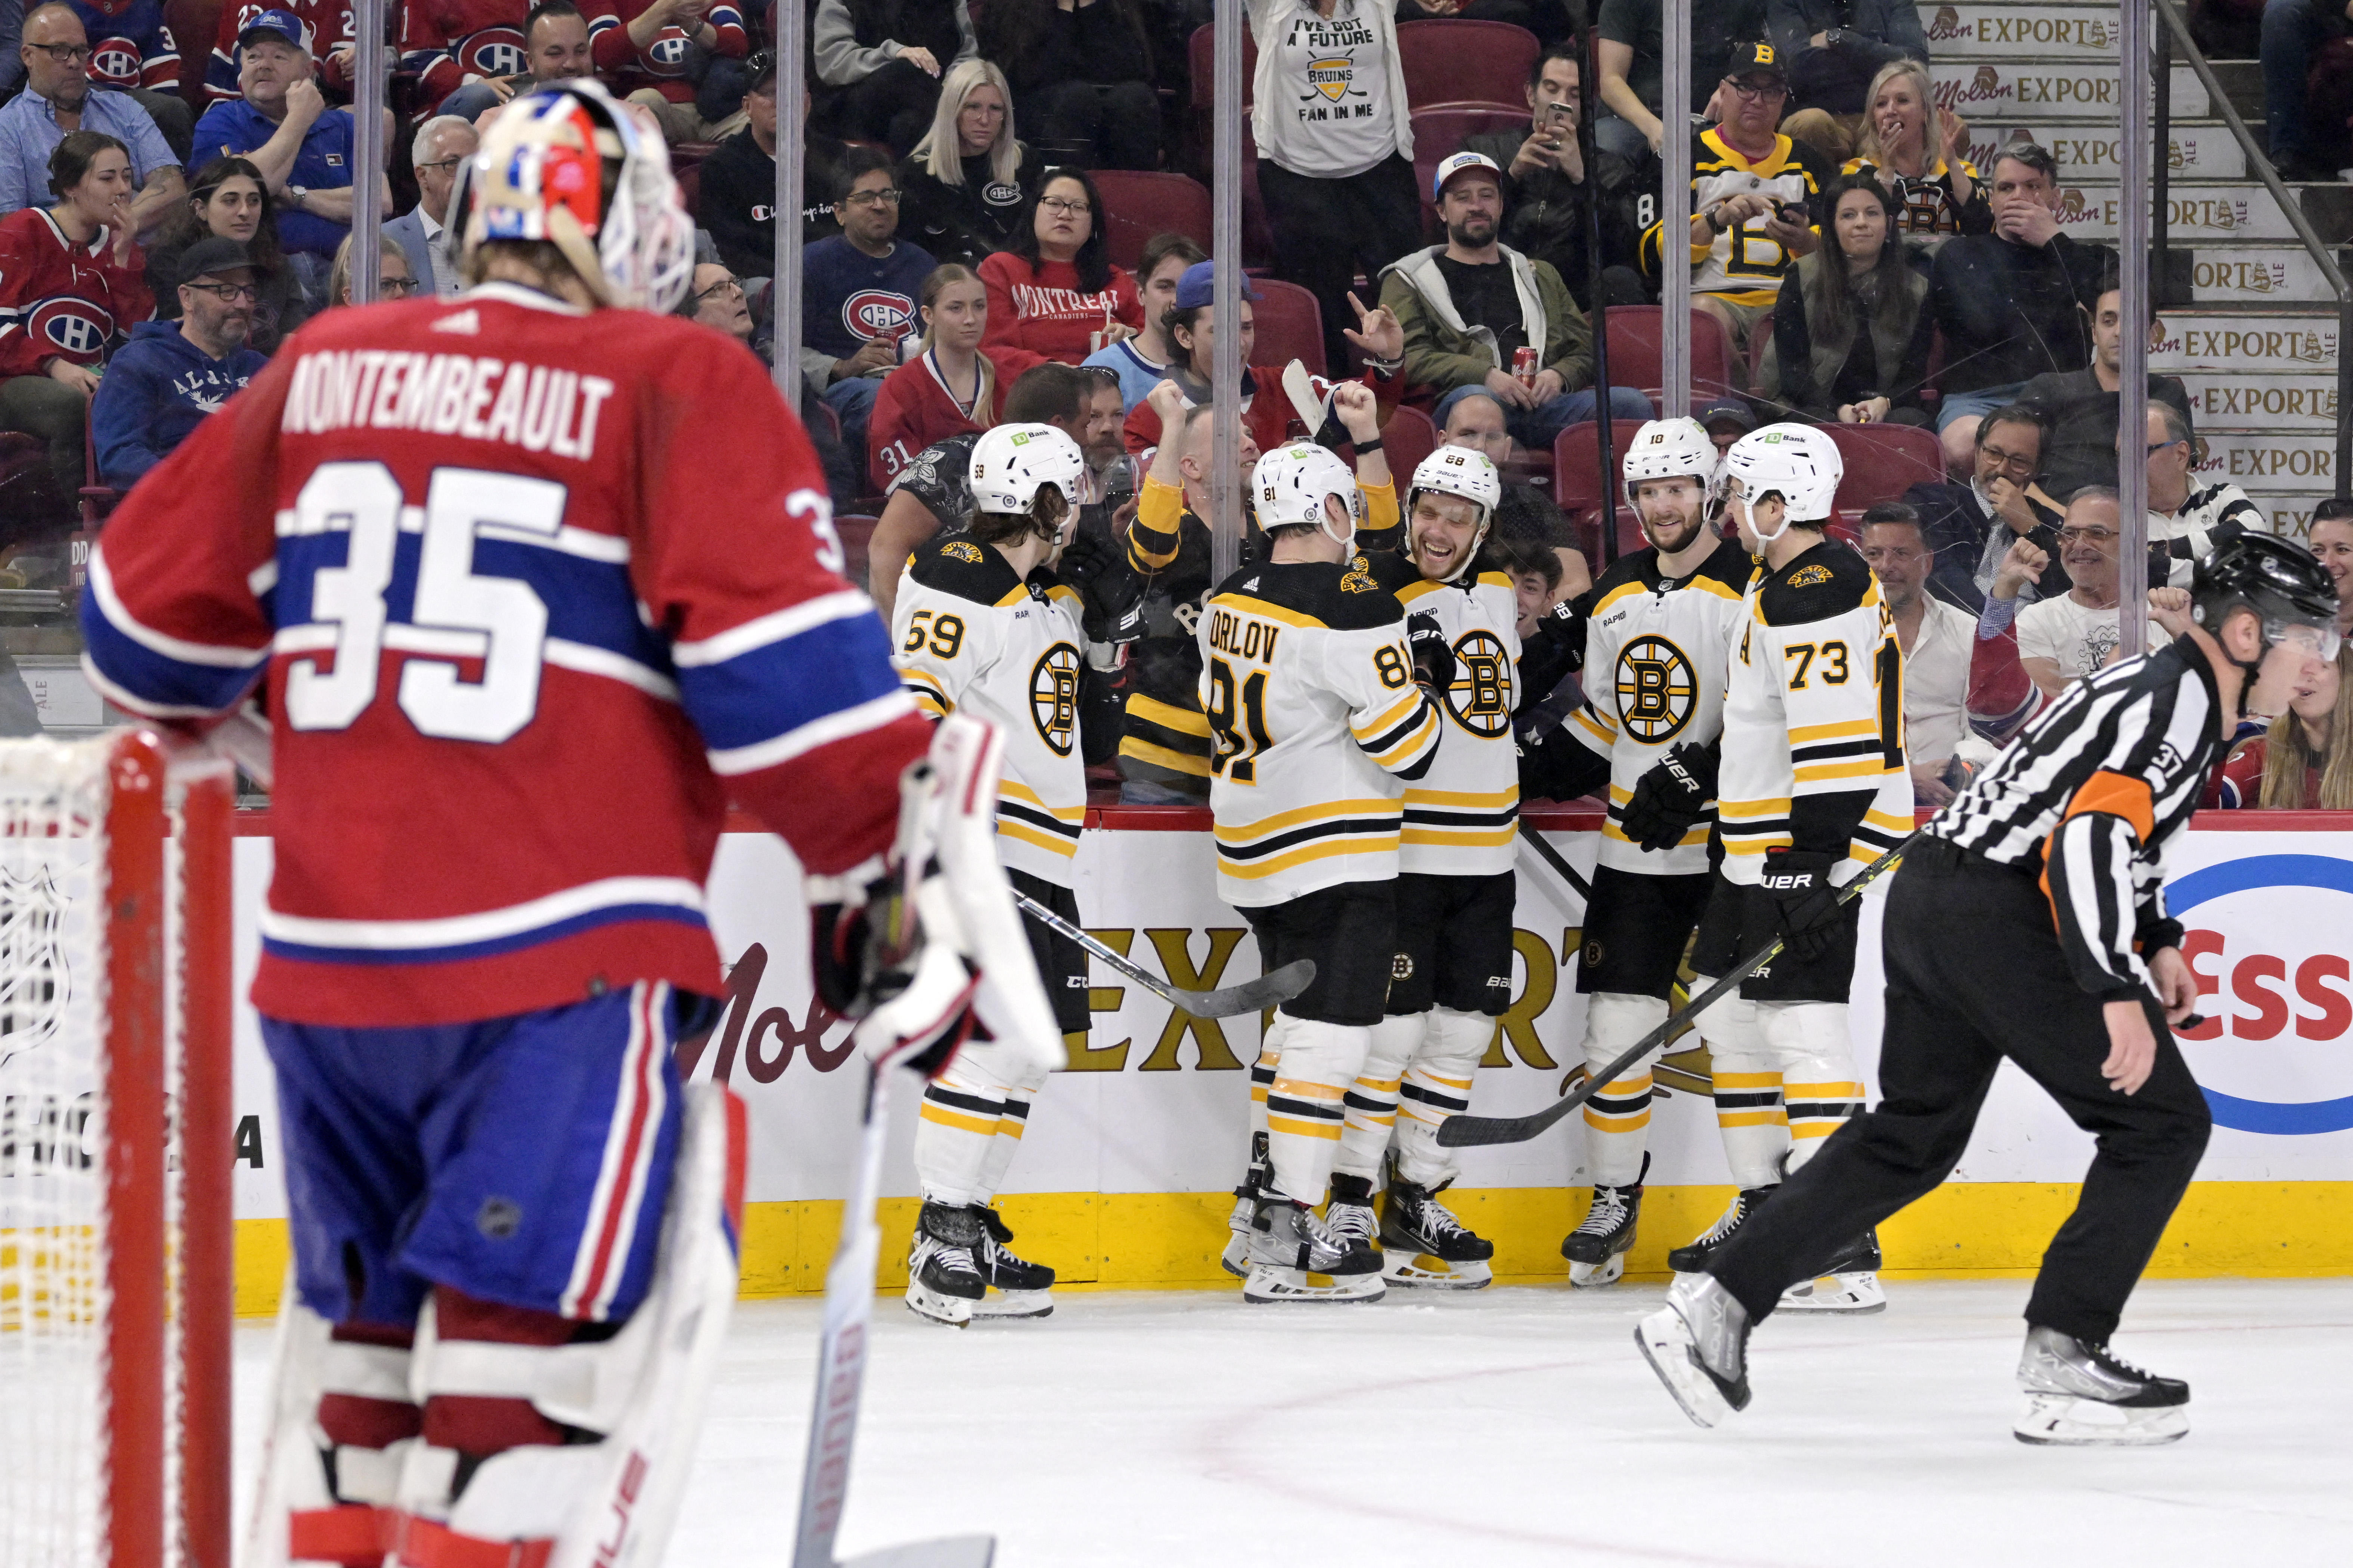 Montreal Canadiens still perfect at home after win over New York Rangers